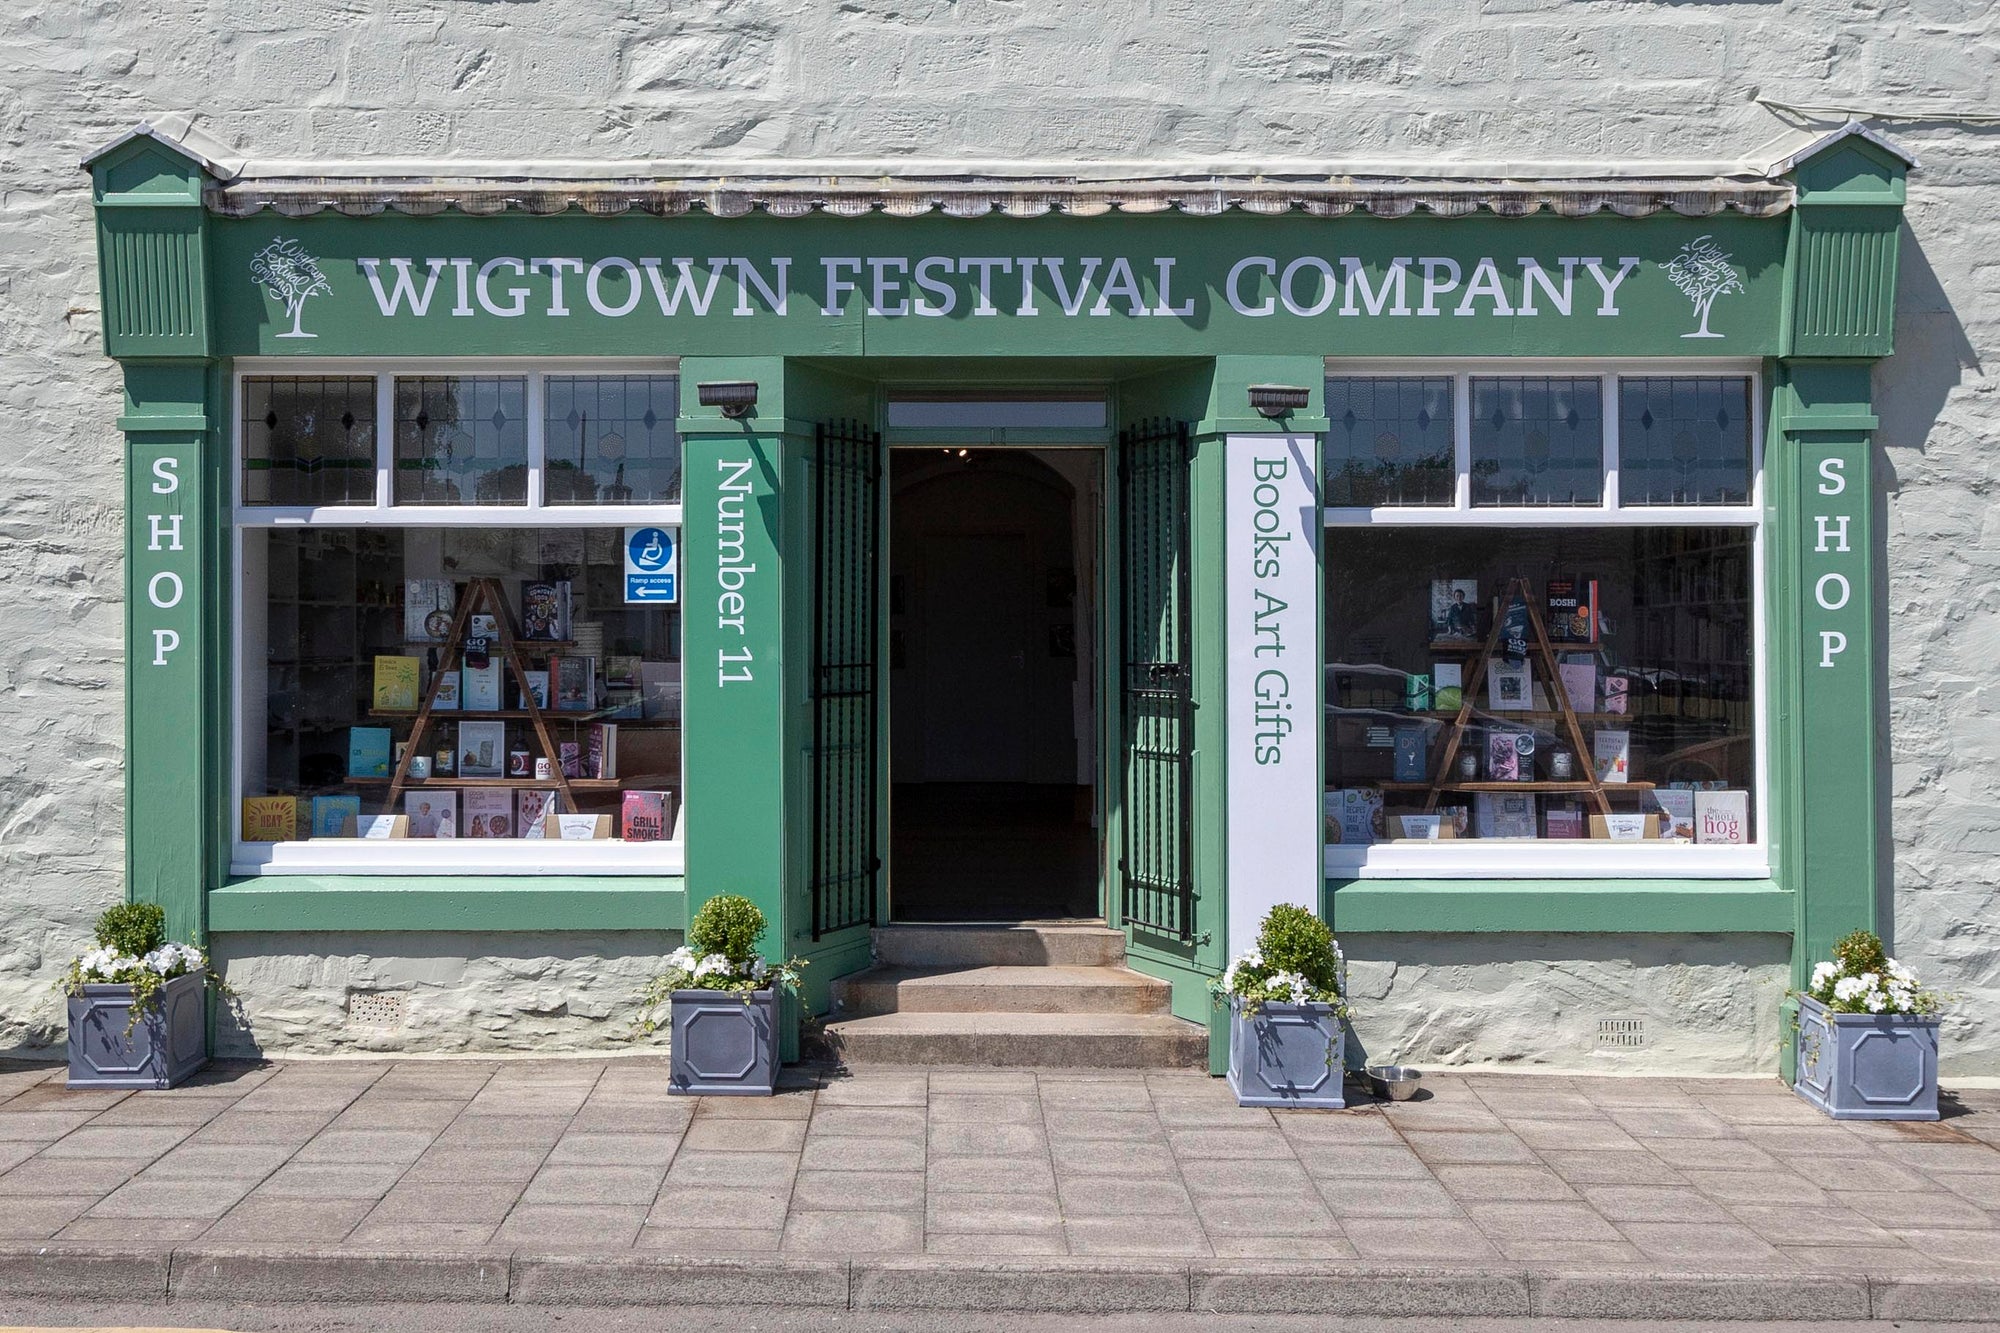 Wigtown Festival Company bookshop, the shop front in Wigtown.